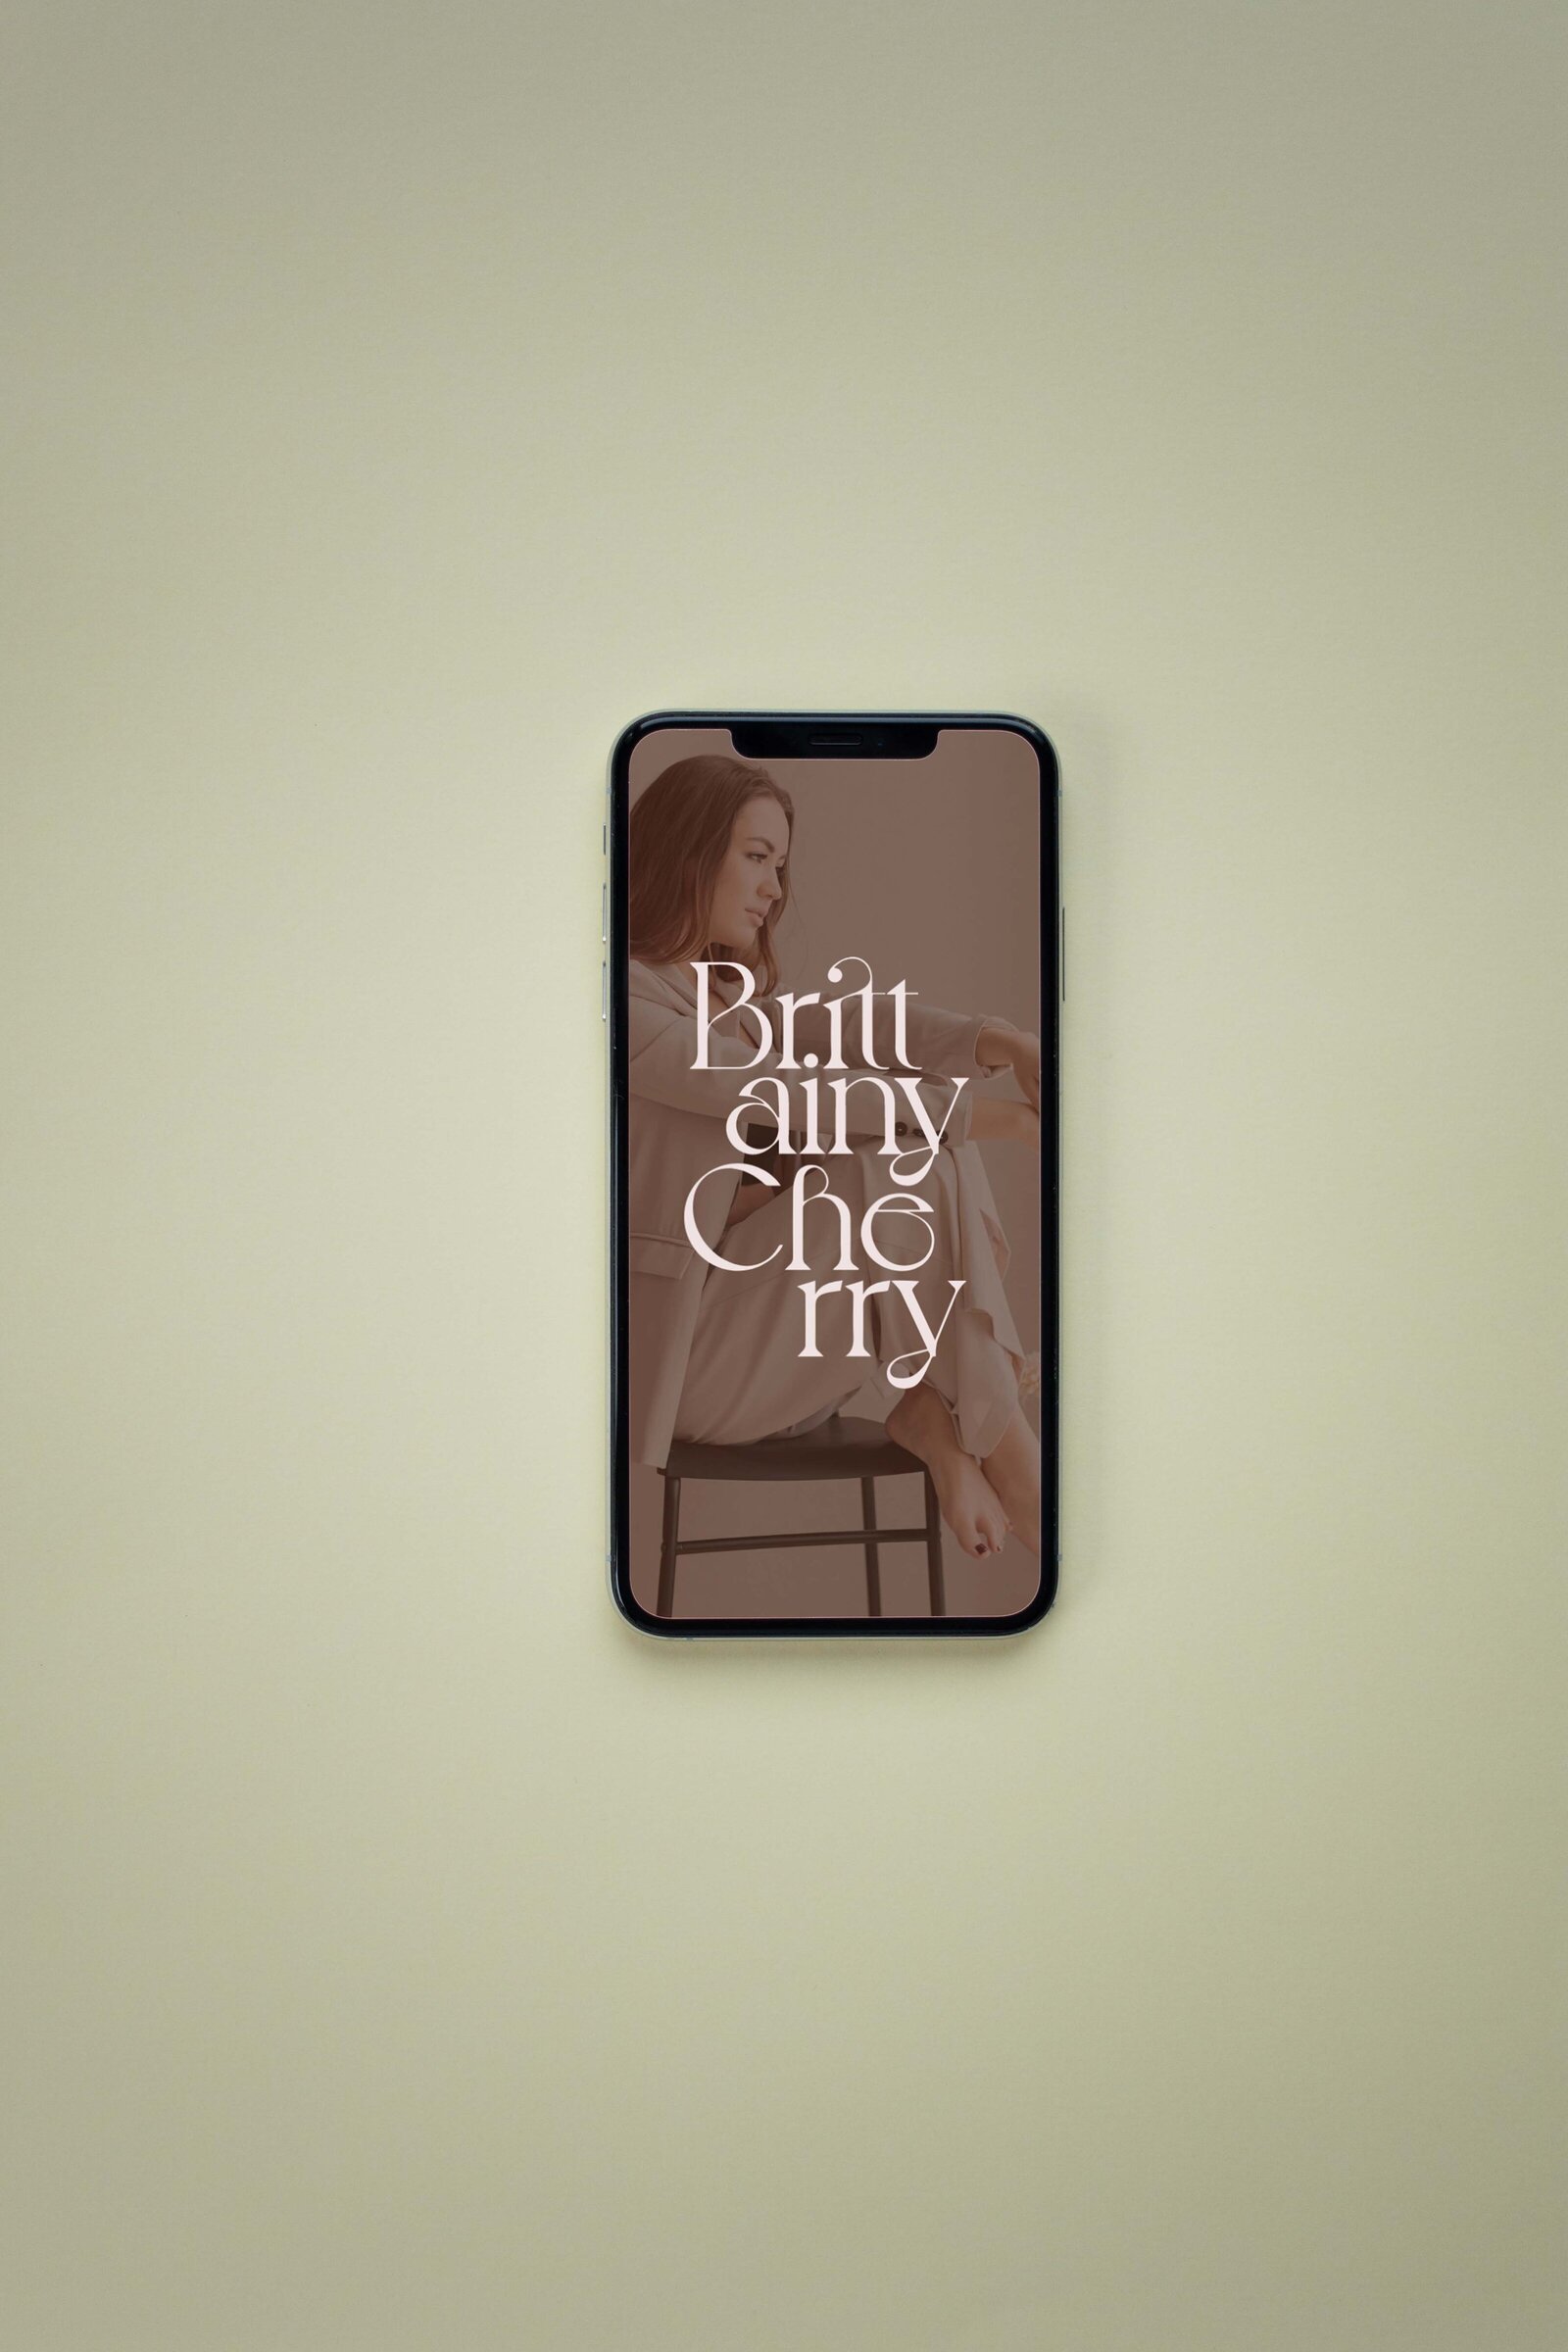 mobile_website_showit_mockup_brittainy_cherry